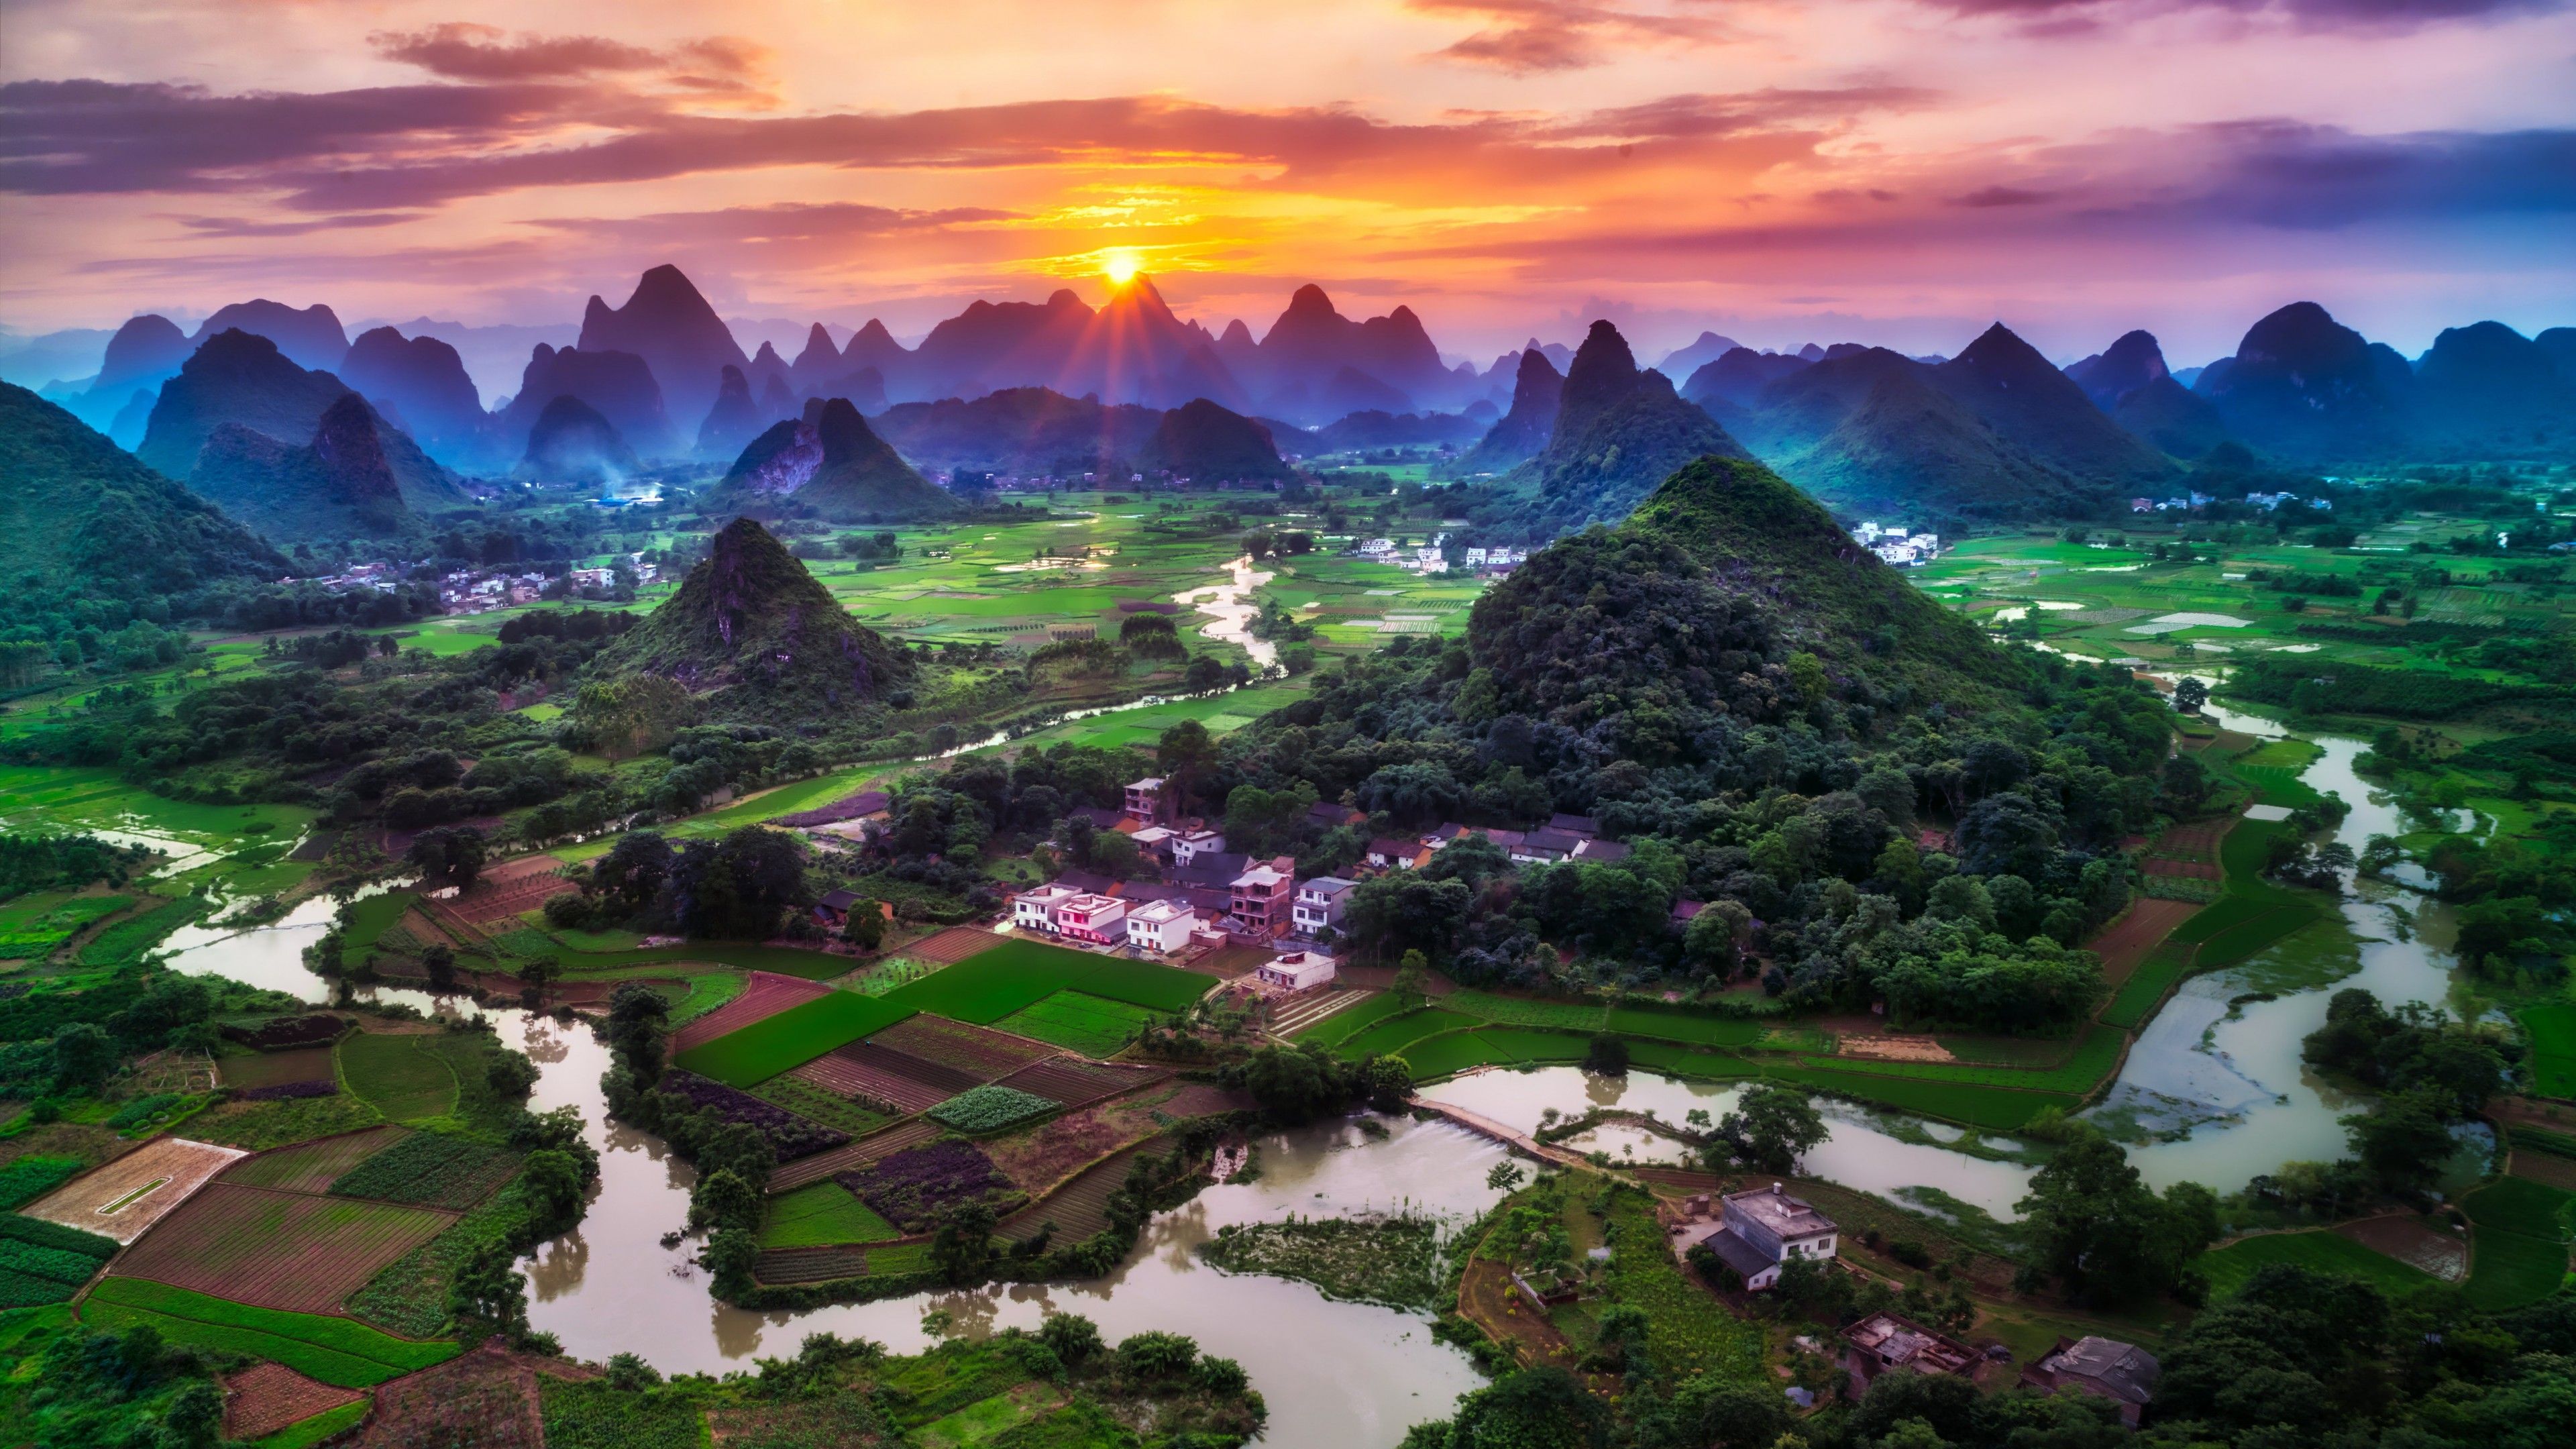 Guilin City 4K Wallpaper, China, Sunset, Beautiful, Green Fields, Village, River, Mountains, Clouds, Nature